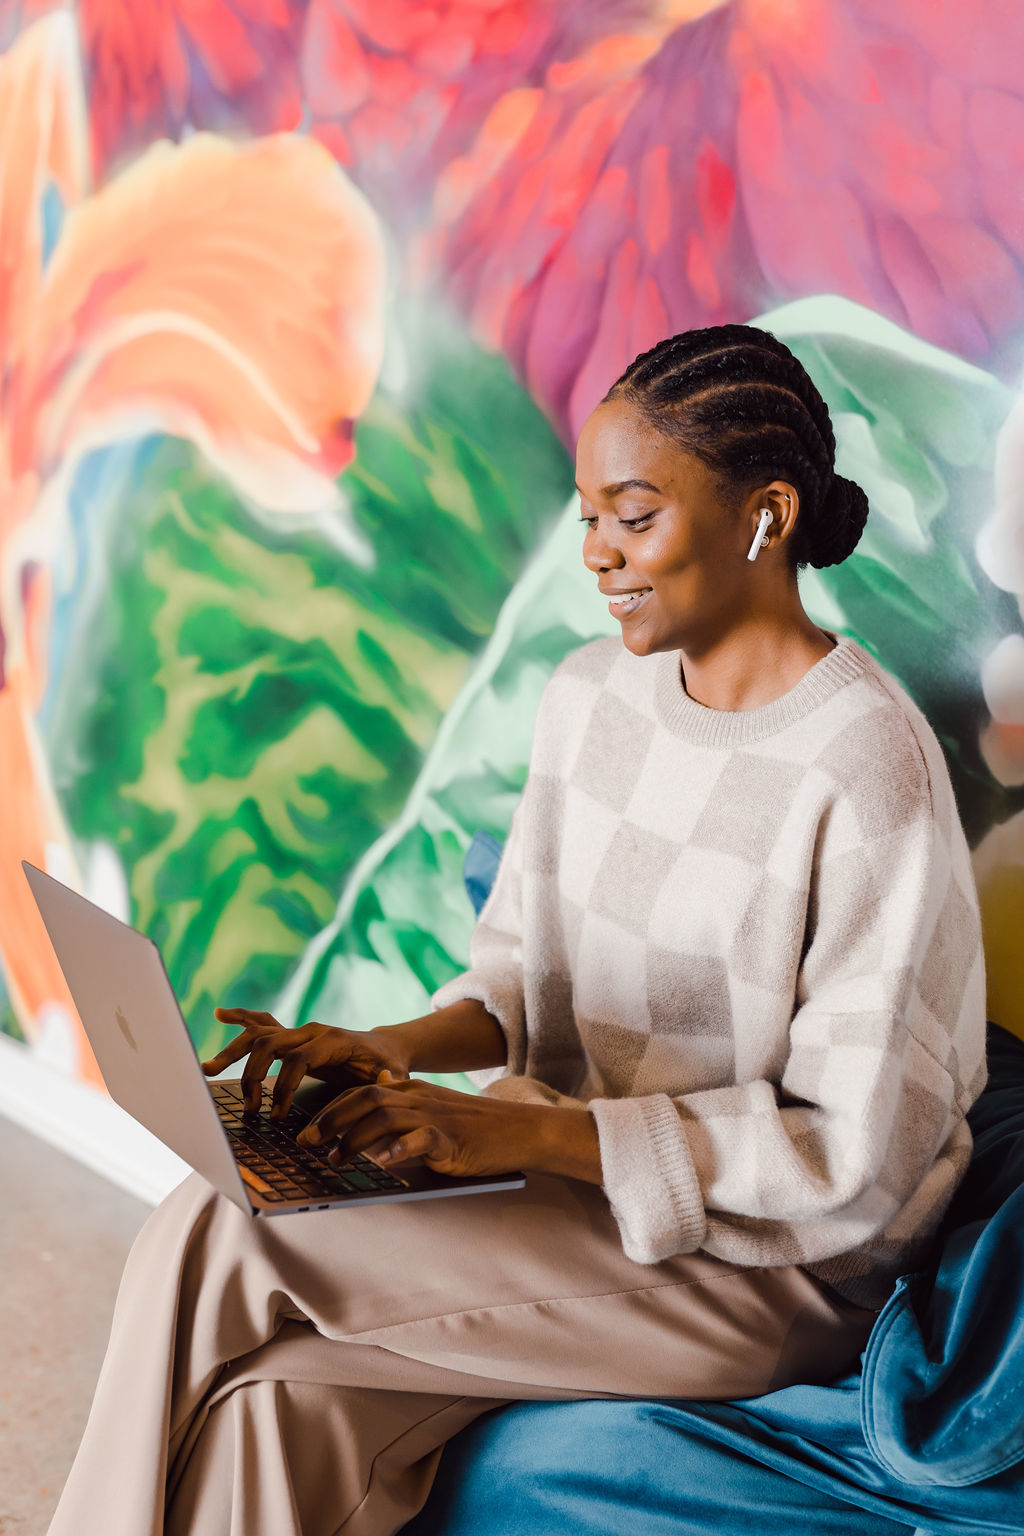 A person with braids wearing a checkered sweater and earphones sits on a blue chair, typing on a laptop against a colorful, abstract background, showcasing the creative side of corporate photography.